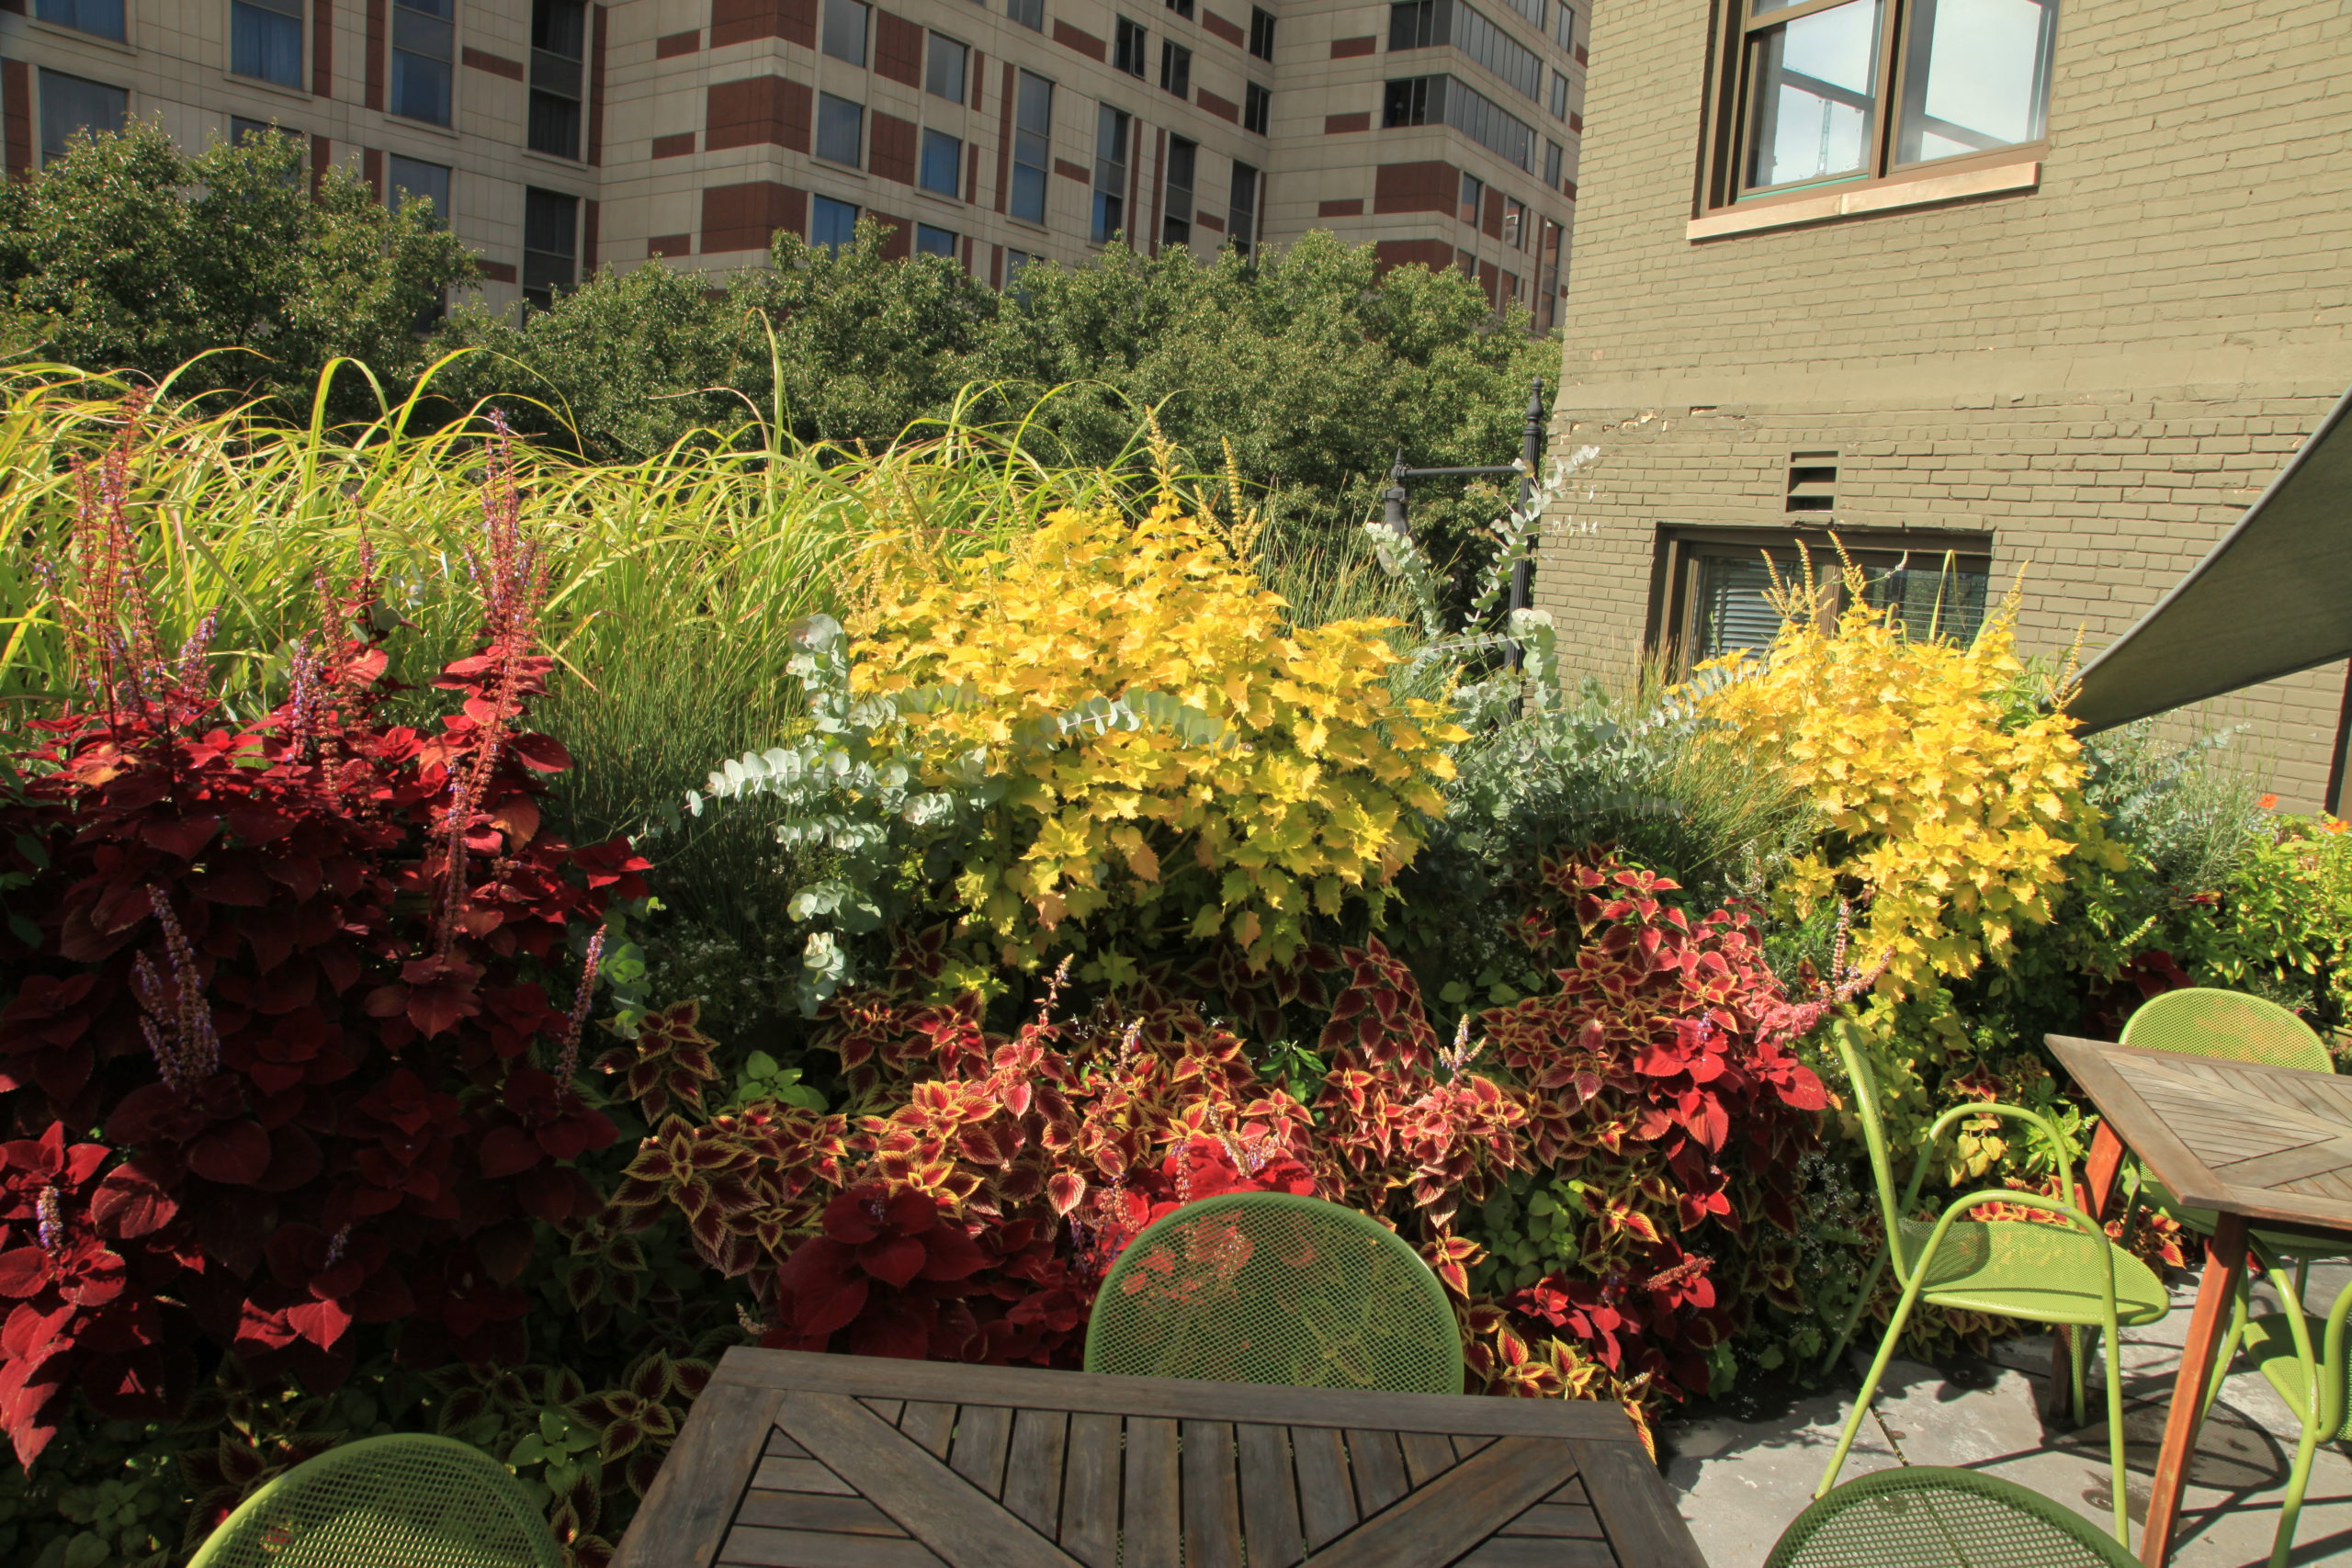 Colorful mix of plants in the LiveWall at the old B.O.B.'s restaurant patio